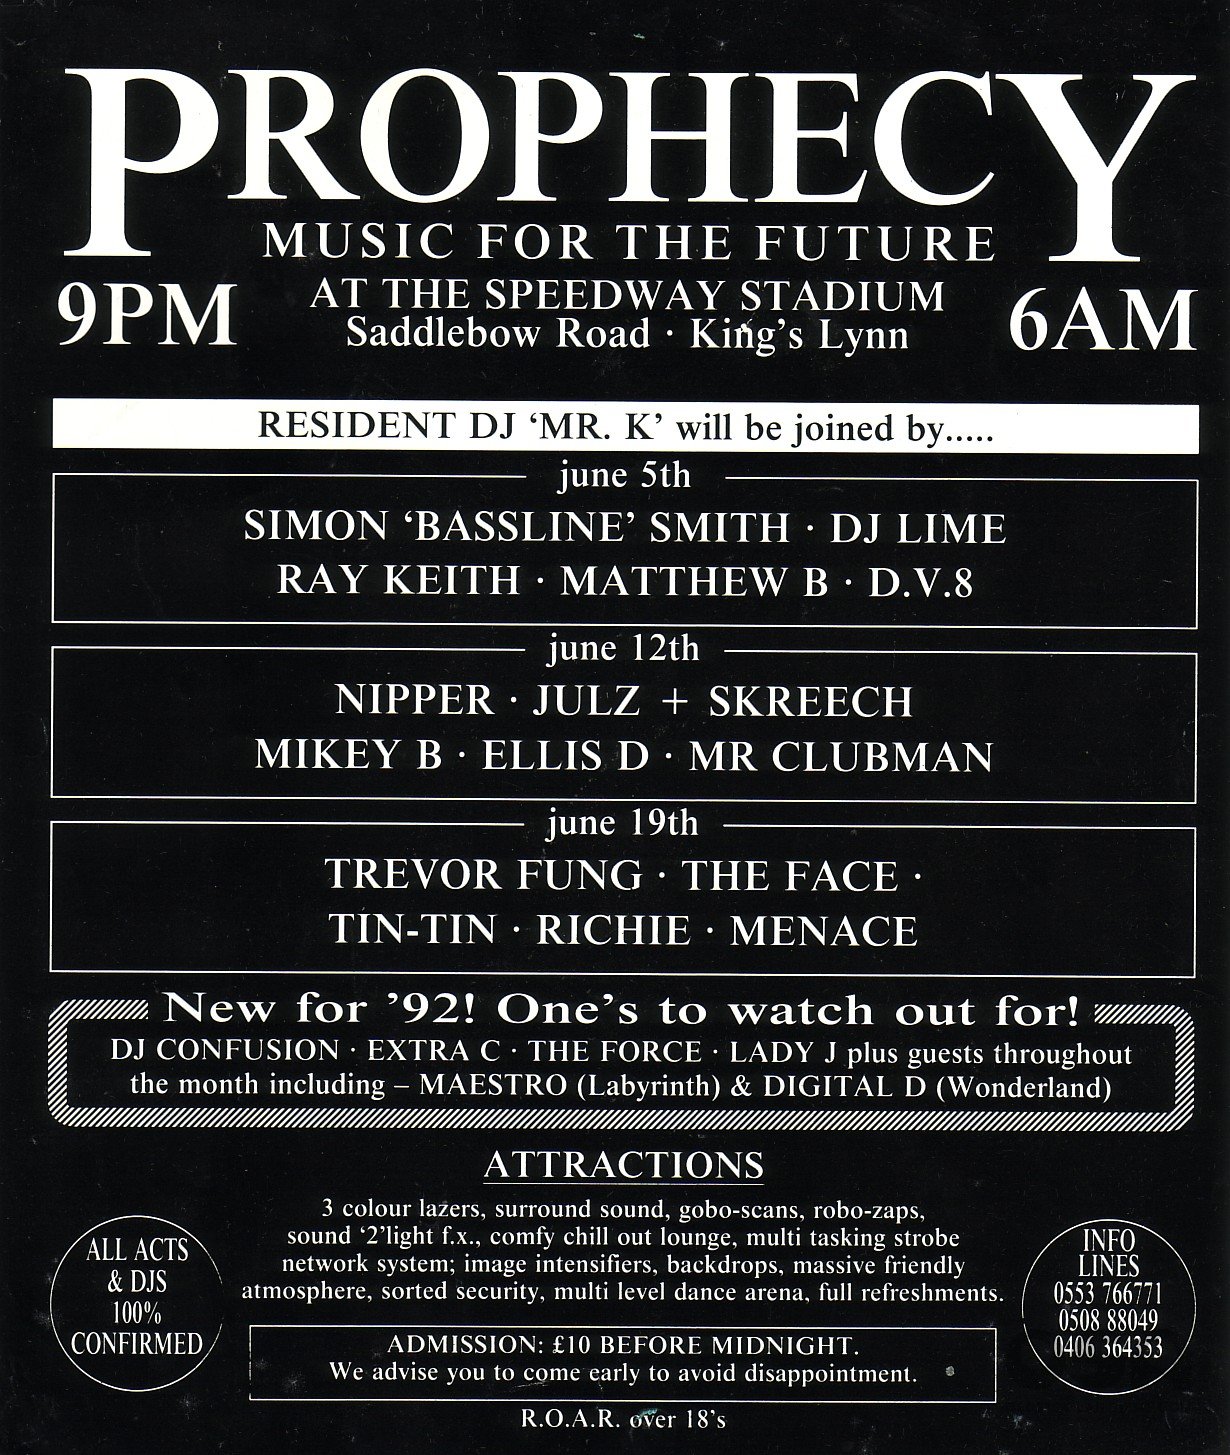 1_Prophecy_Music_for_the_Future___The_Speedway_Kings_Lynn_London_June_92_rear_view.jpg